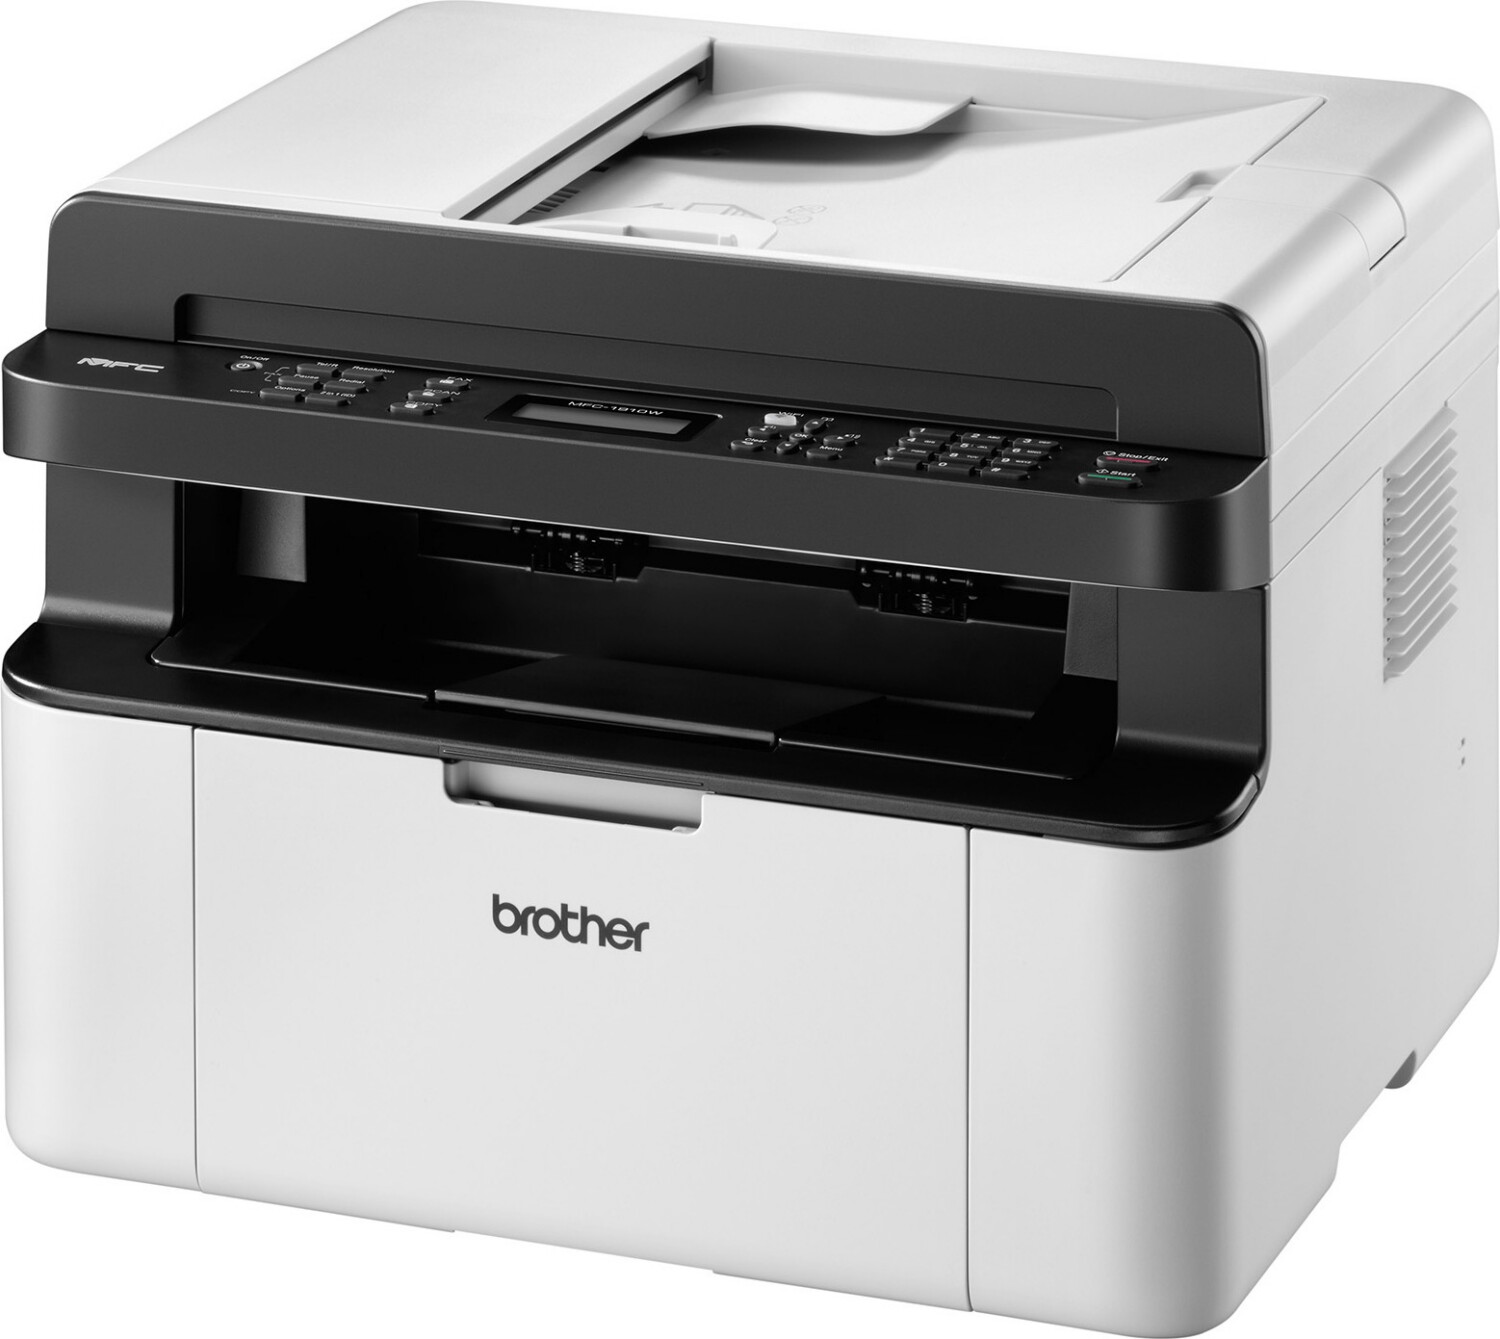 MFC-L2750DW - Brother Specifications and Certification